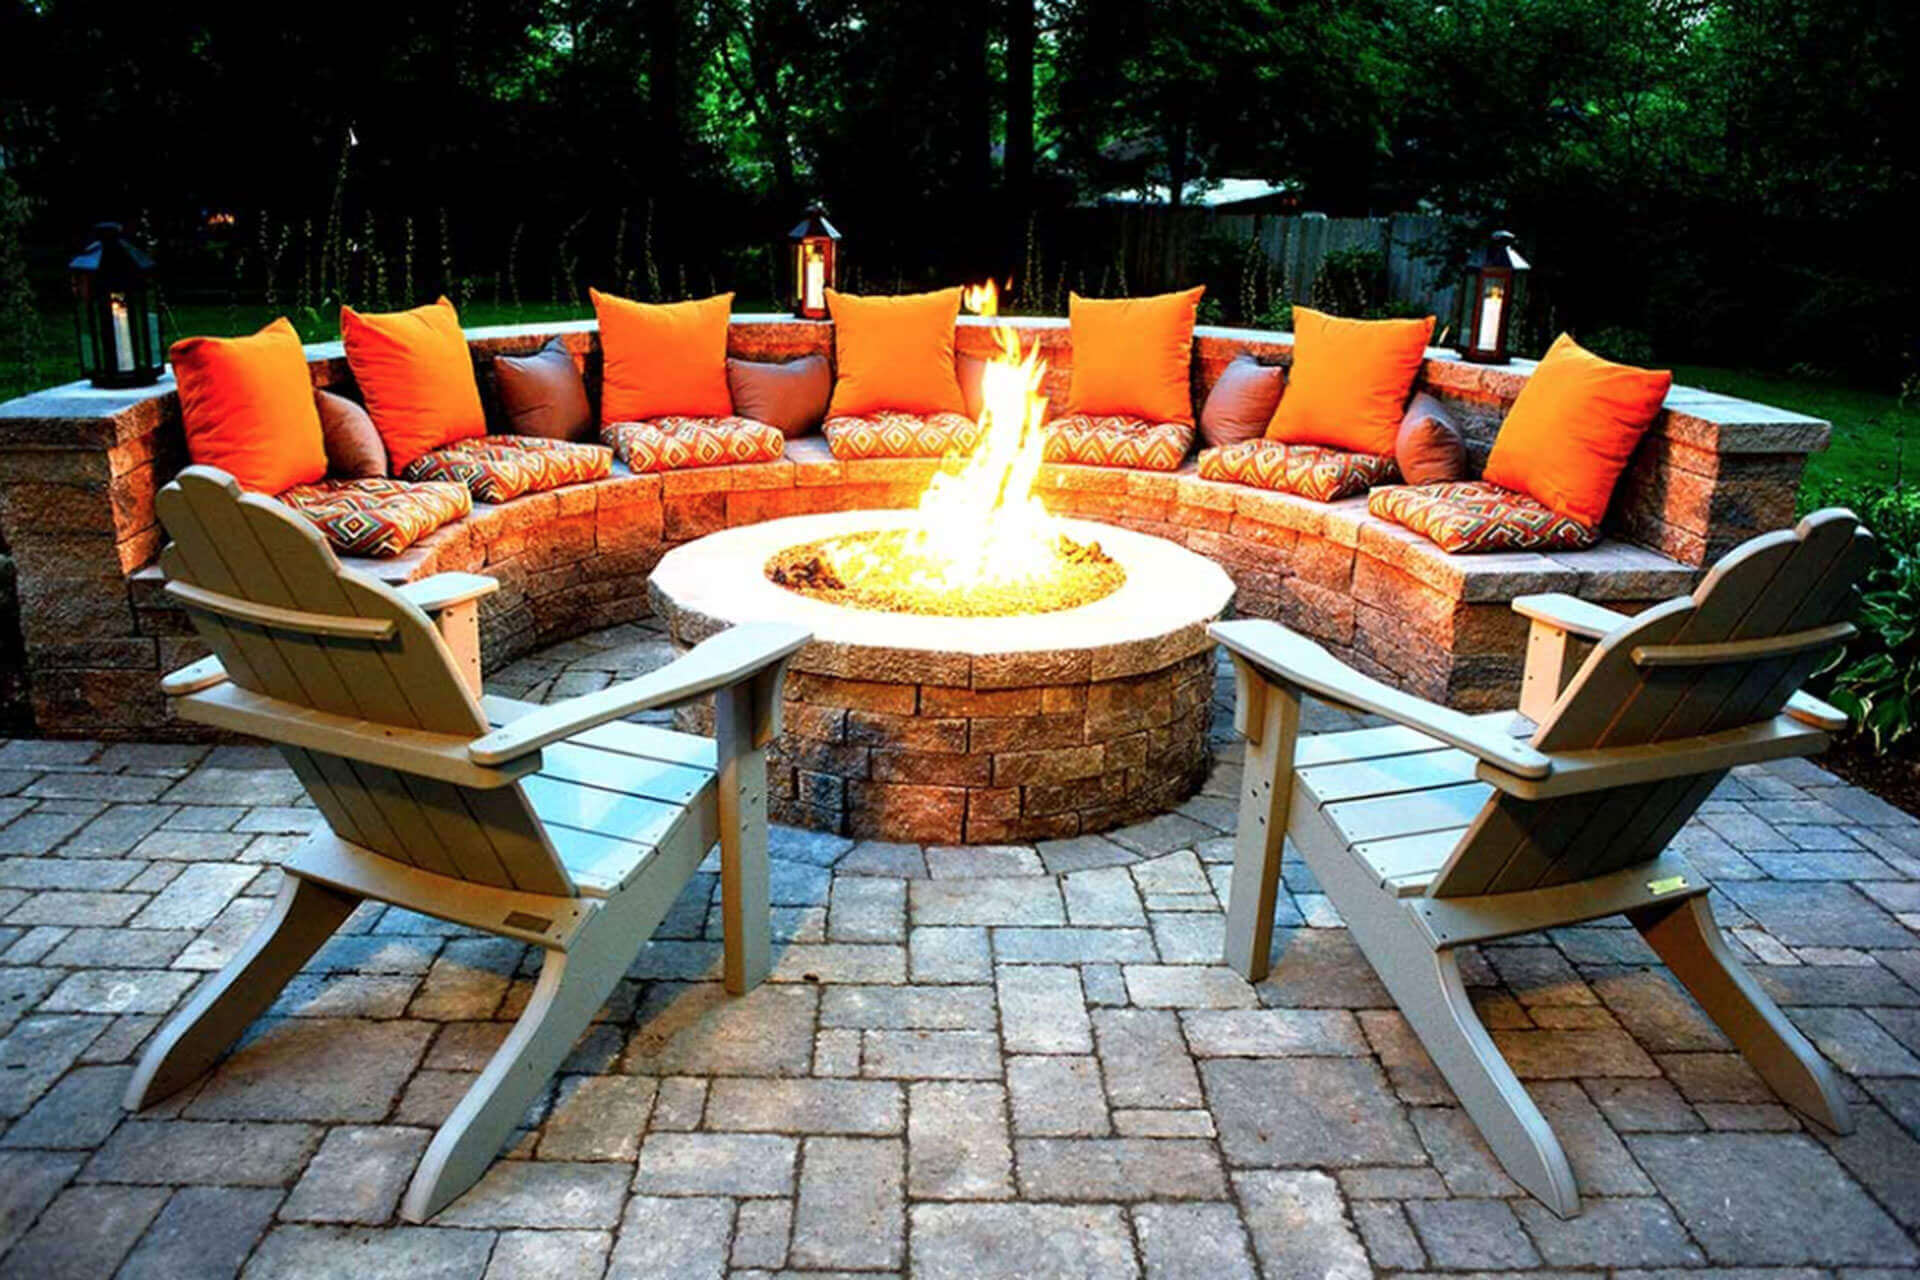 Orange Glowing Round Firepit Area Idea | Awesome Firepit Area Ideas For Your Outdoor Activities